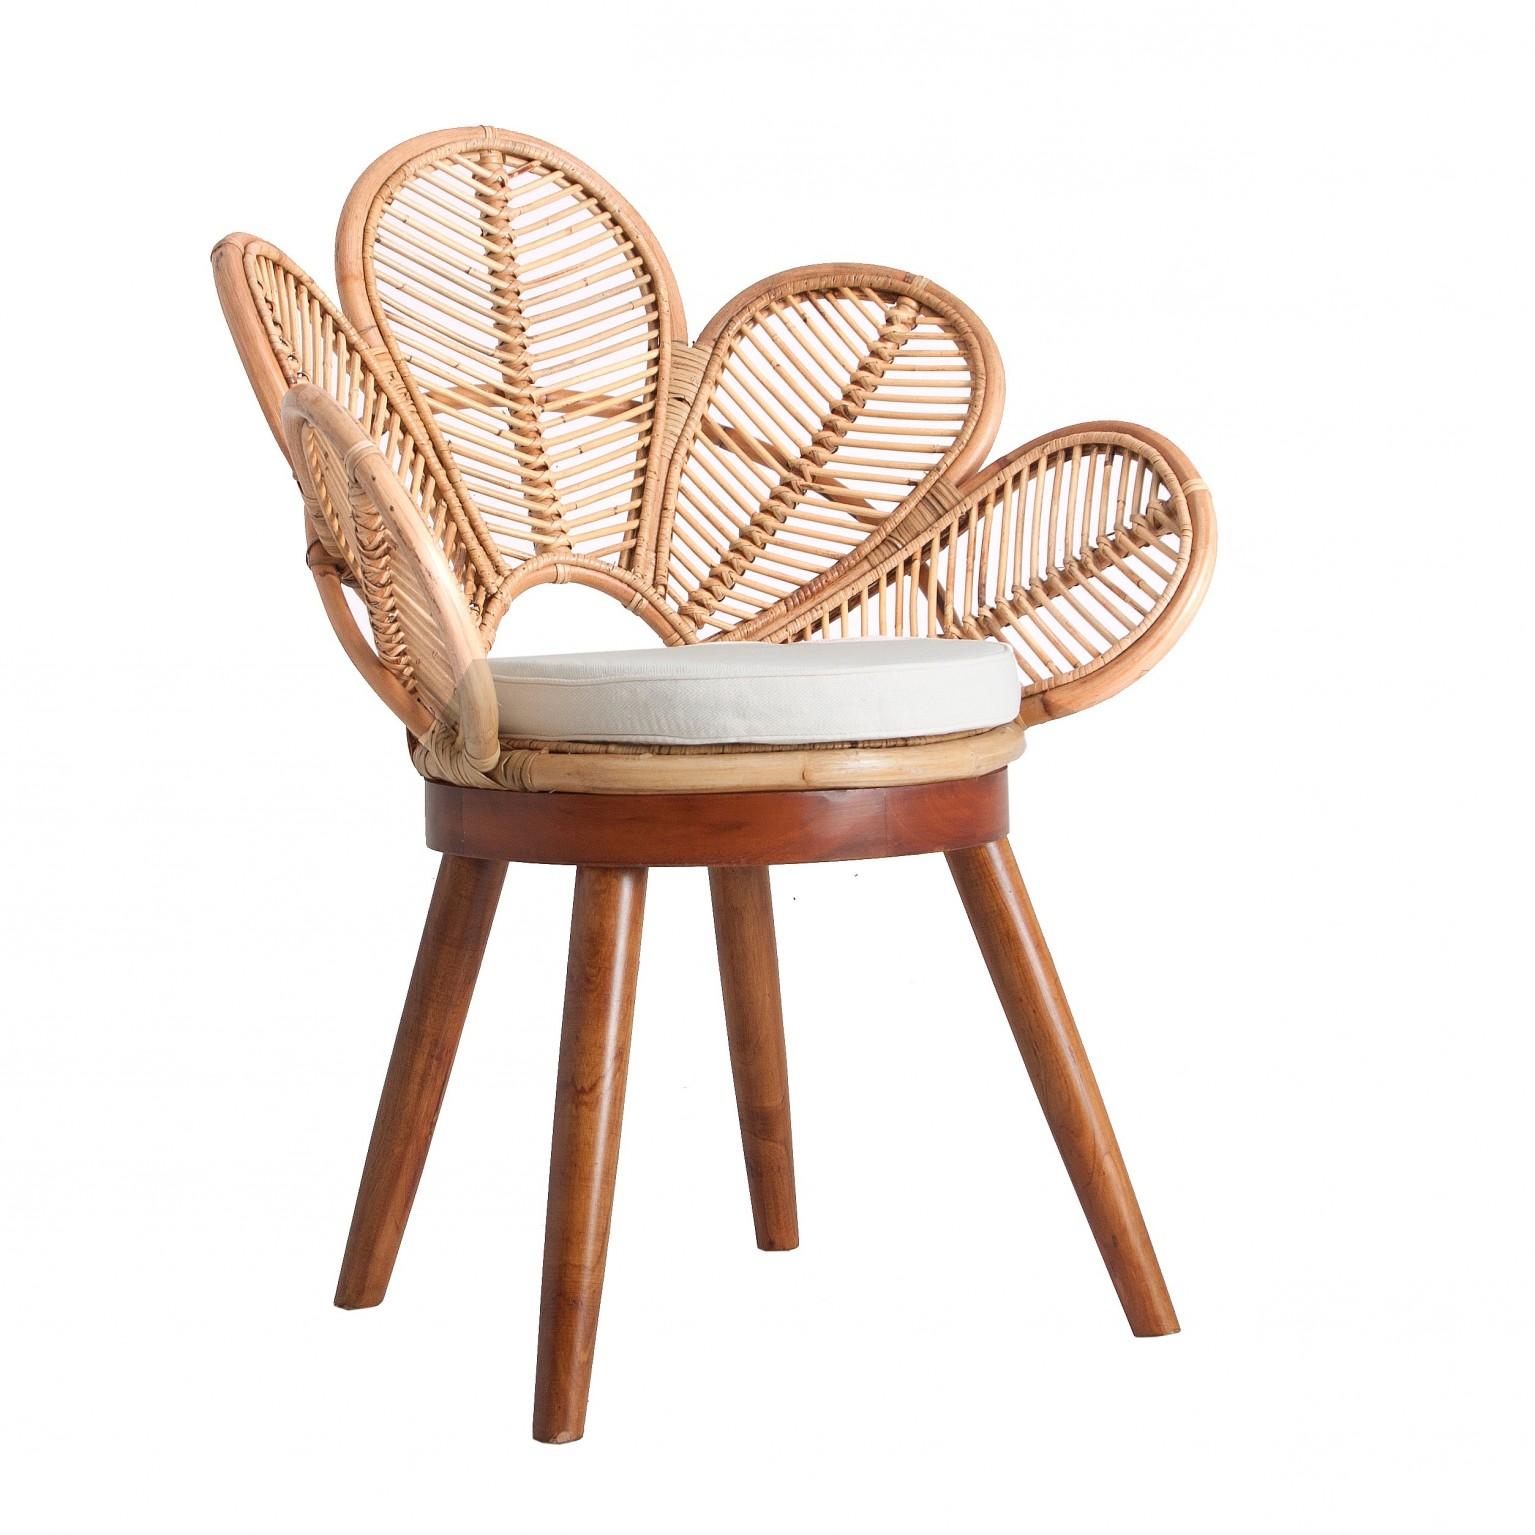 Gorgeous armchair: rattan flower petal shaped seat, on mahogany wooden feet. Perfect on your terrace, in your veranda, around the swimming pool or the dining table. Poetic, elegant, aerial and colorful. All in excellent state (never used)!